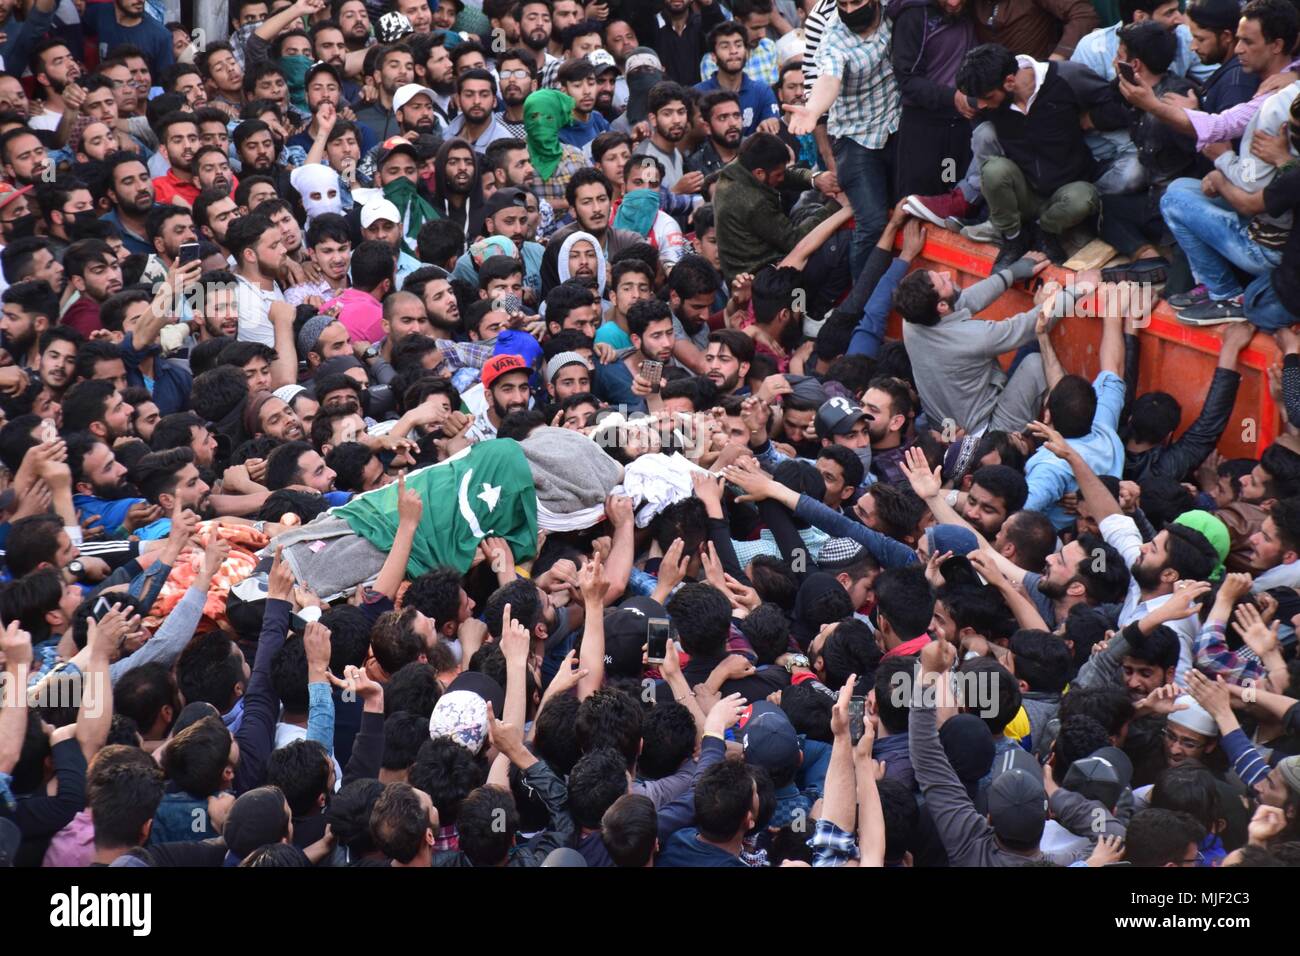 Srinagar, Jammu & Kashmir, India, May 5, 2018.  (EDITORS NOTE: Image depicts death.) People carrying body of militant Fayaz Ahmed Hamal at his residence Khankah Area of Srinagar Summer Capital Of Indian Kashmir on Saturday for burial.Multiple Funeral processions held in srinagar summer capital of Indian Kashmir on Saturday of Fayaz Ahmed Hamal a LeT (Lashkar-e-Taiba) Militant and a Civilian Adil Ahmed Yatoo who were killed by armoured vehicle on Saturday during clashes near Encounter site. Credit: ZUMA Press, Inc./Alamy Live News Stock Photo